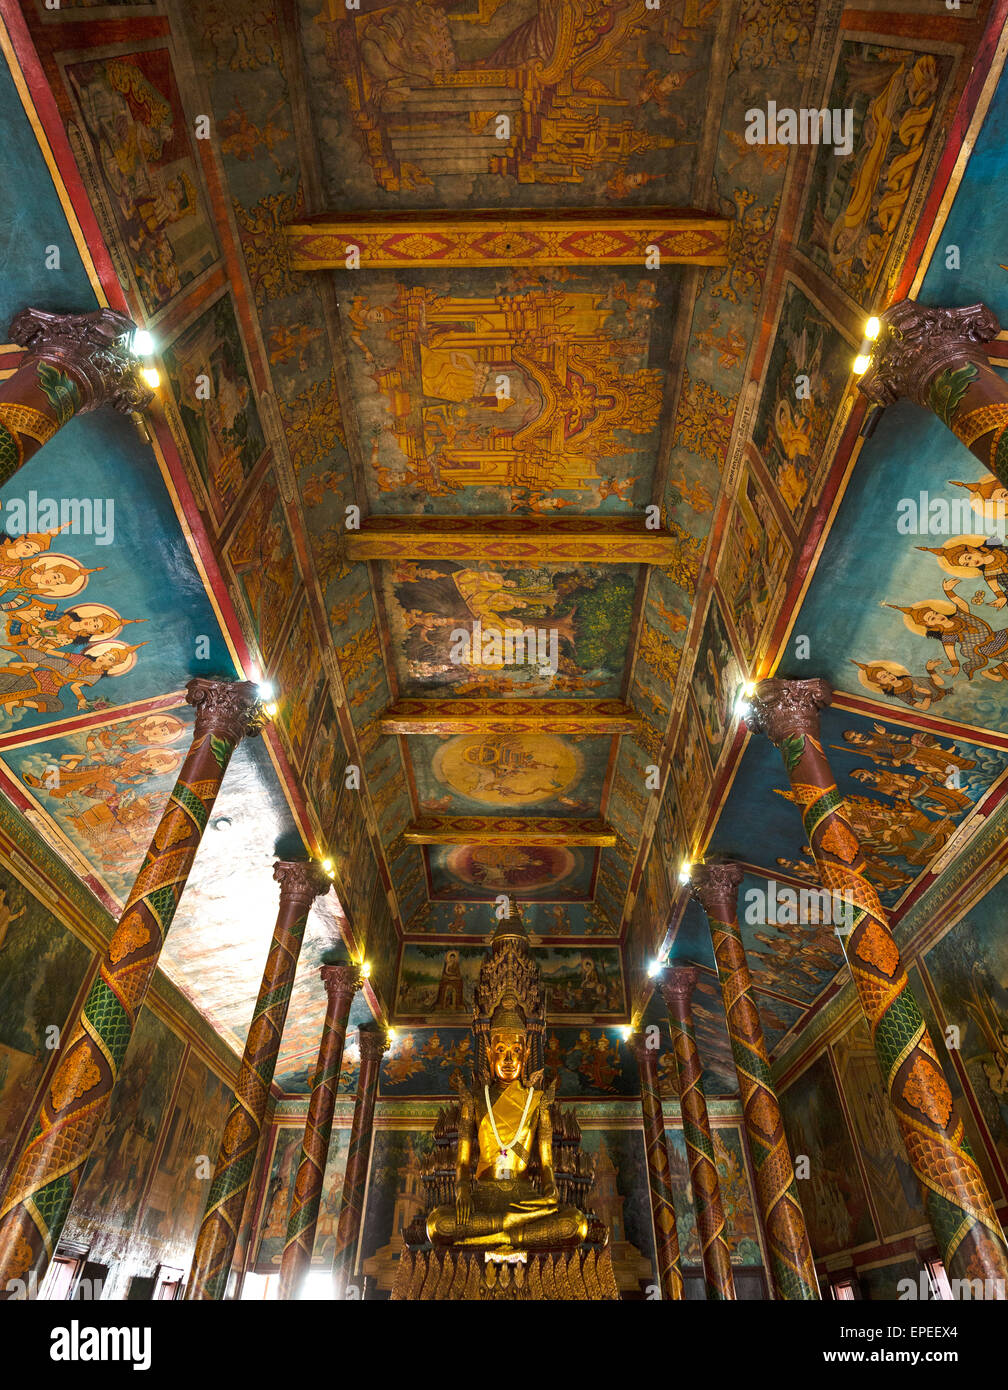 Bronze Statue and ceiling paintings, Buddha statue in the temple Phnom Penh, Cambodia Stock Photo